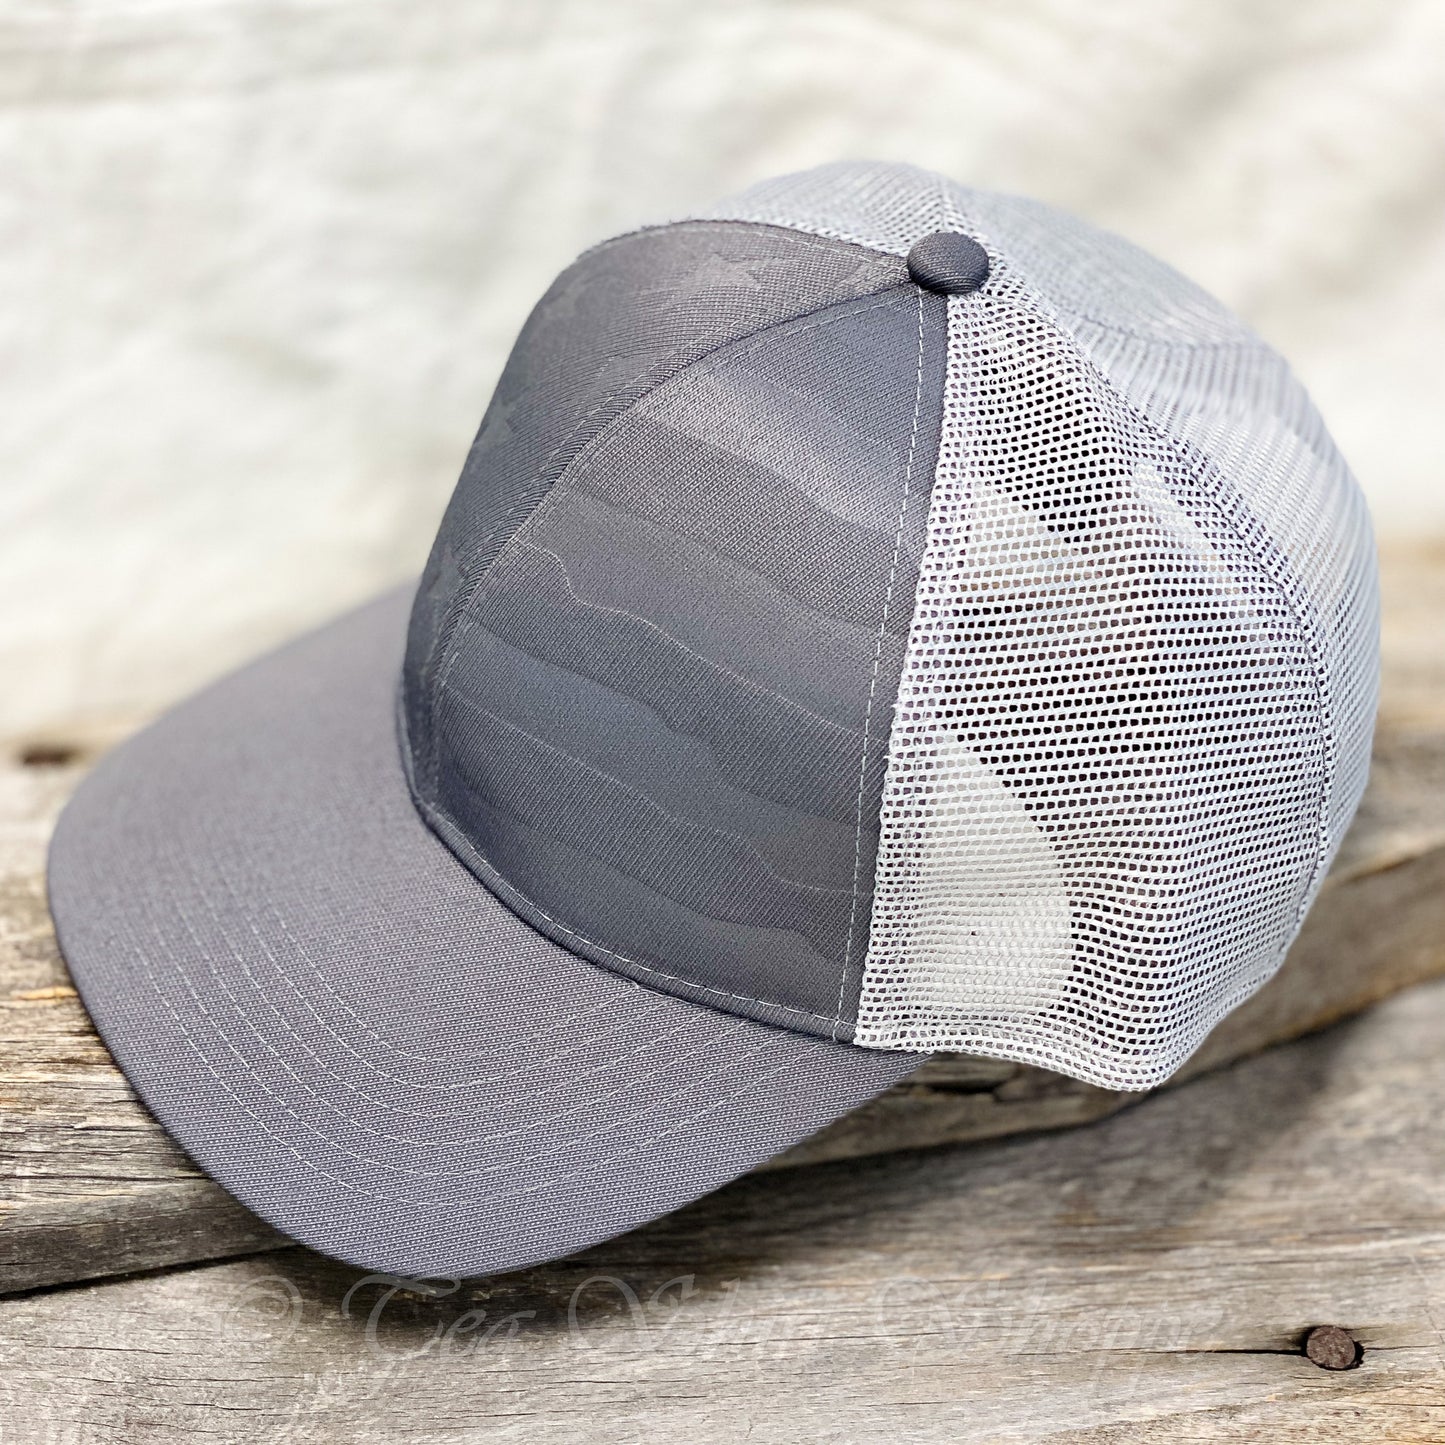 The pre-curved visor of the cap adds an extra layer of style while providing protection from the sun's harmful rays. With its snapback tab closure, the cap offers a secure and comfortable fit, allowing you to wear it all day long without any discomfort.